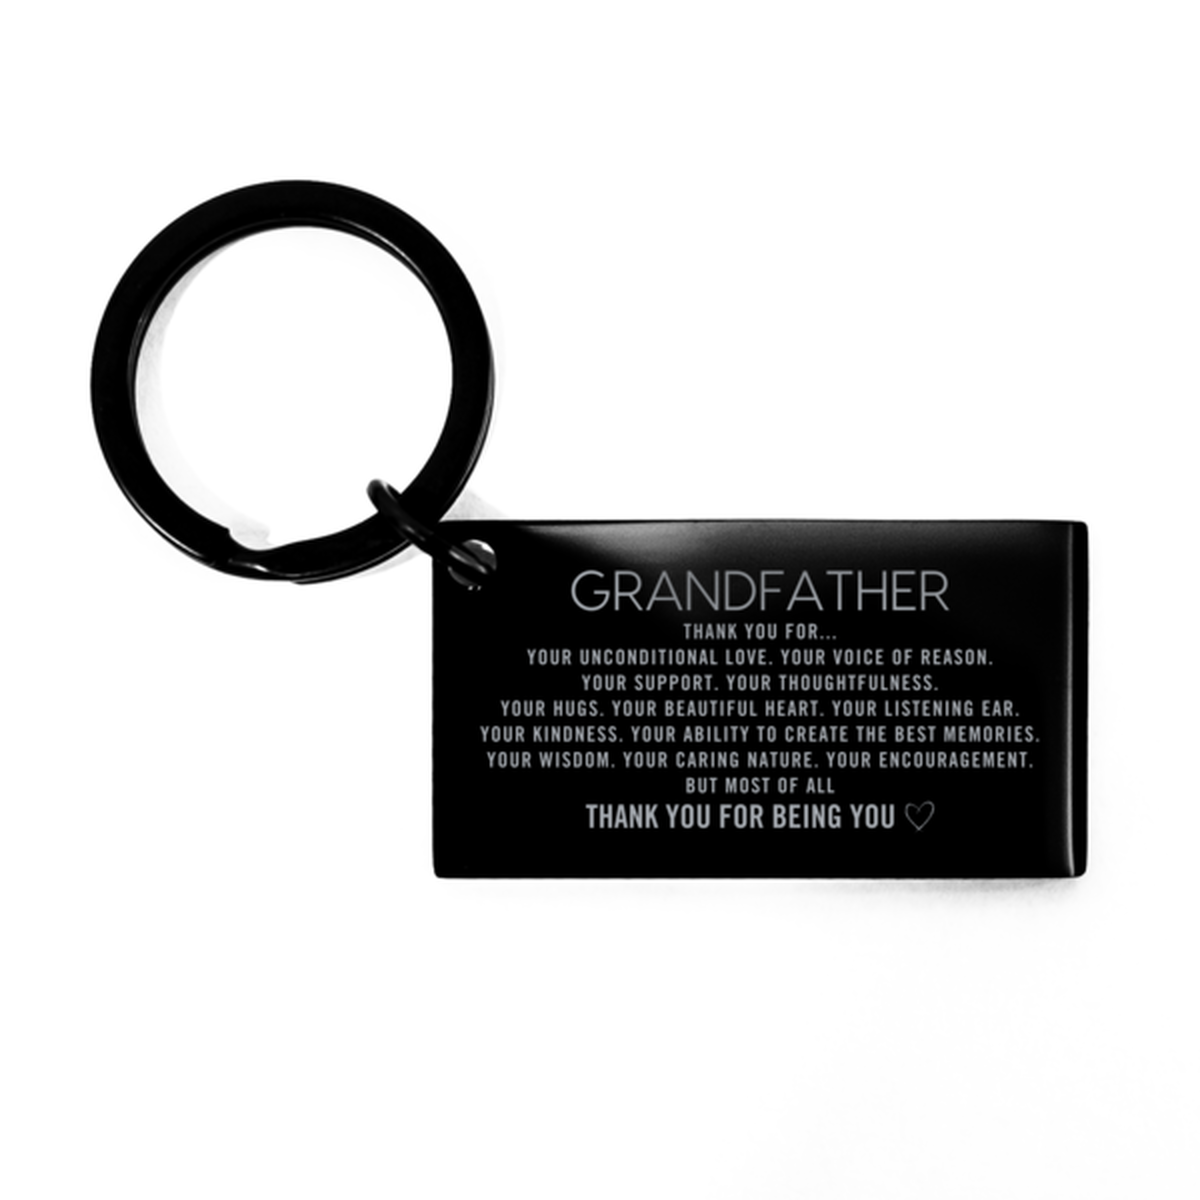 Grandfather Keychain Custom, Engraved Gifts For Grandfather Christmas Graduation Birthday Gifts for Men Women Grandfather Thank you for Your unconditional love